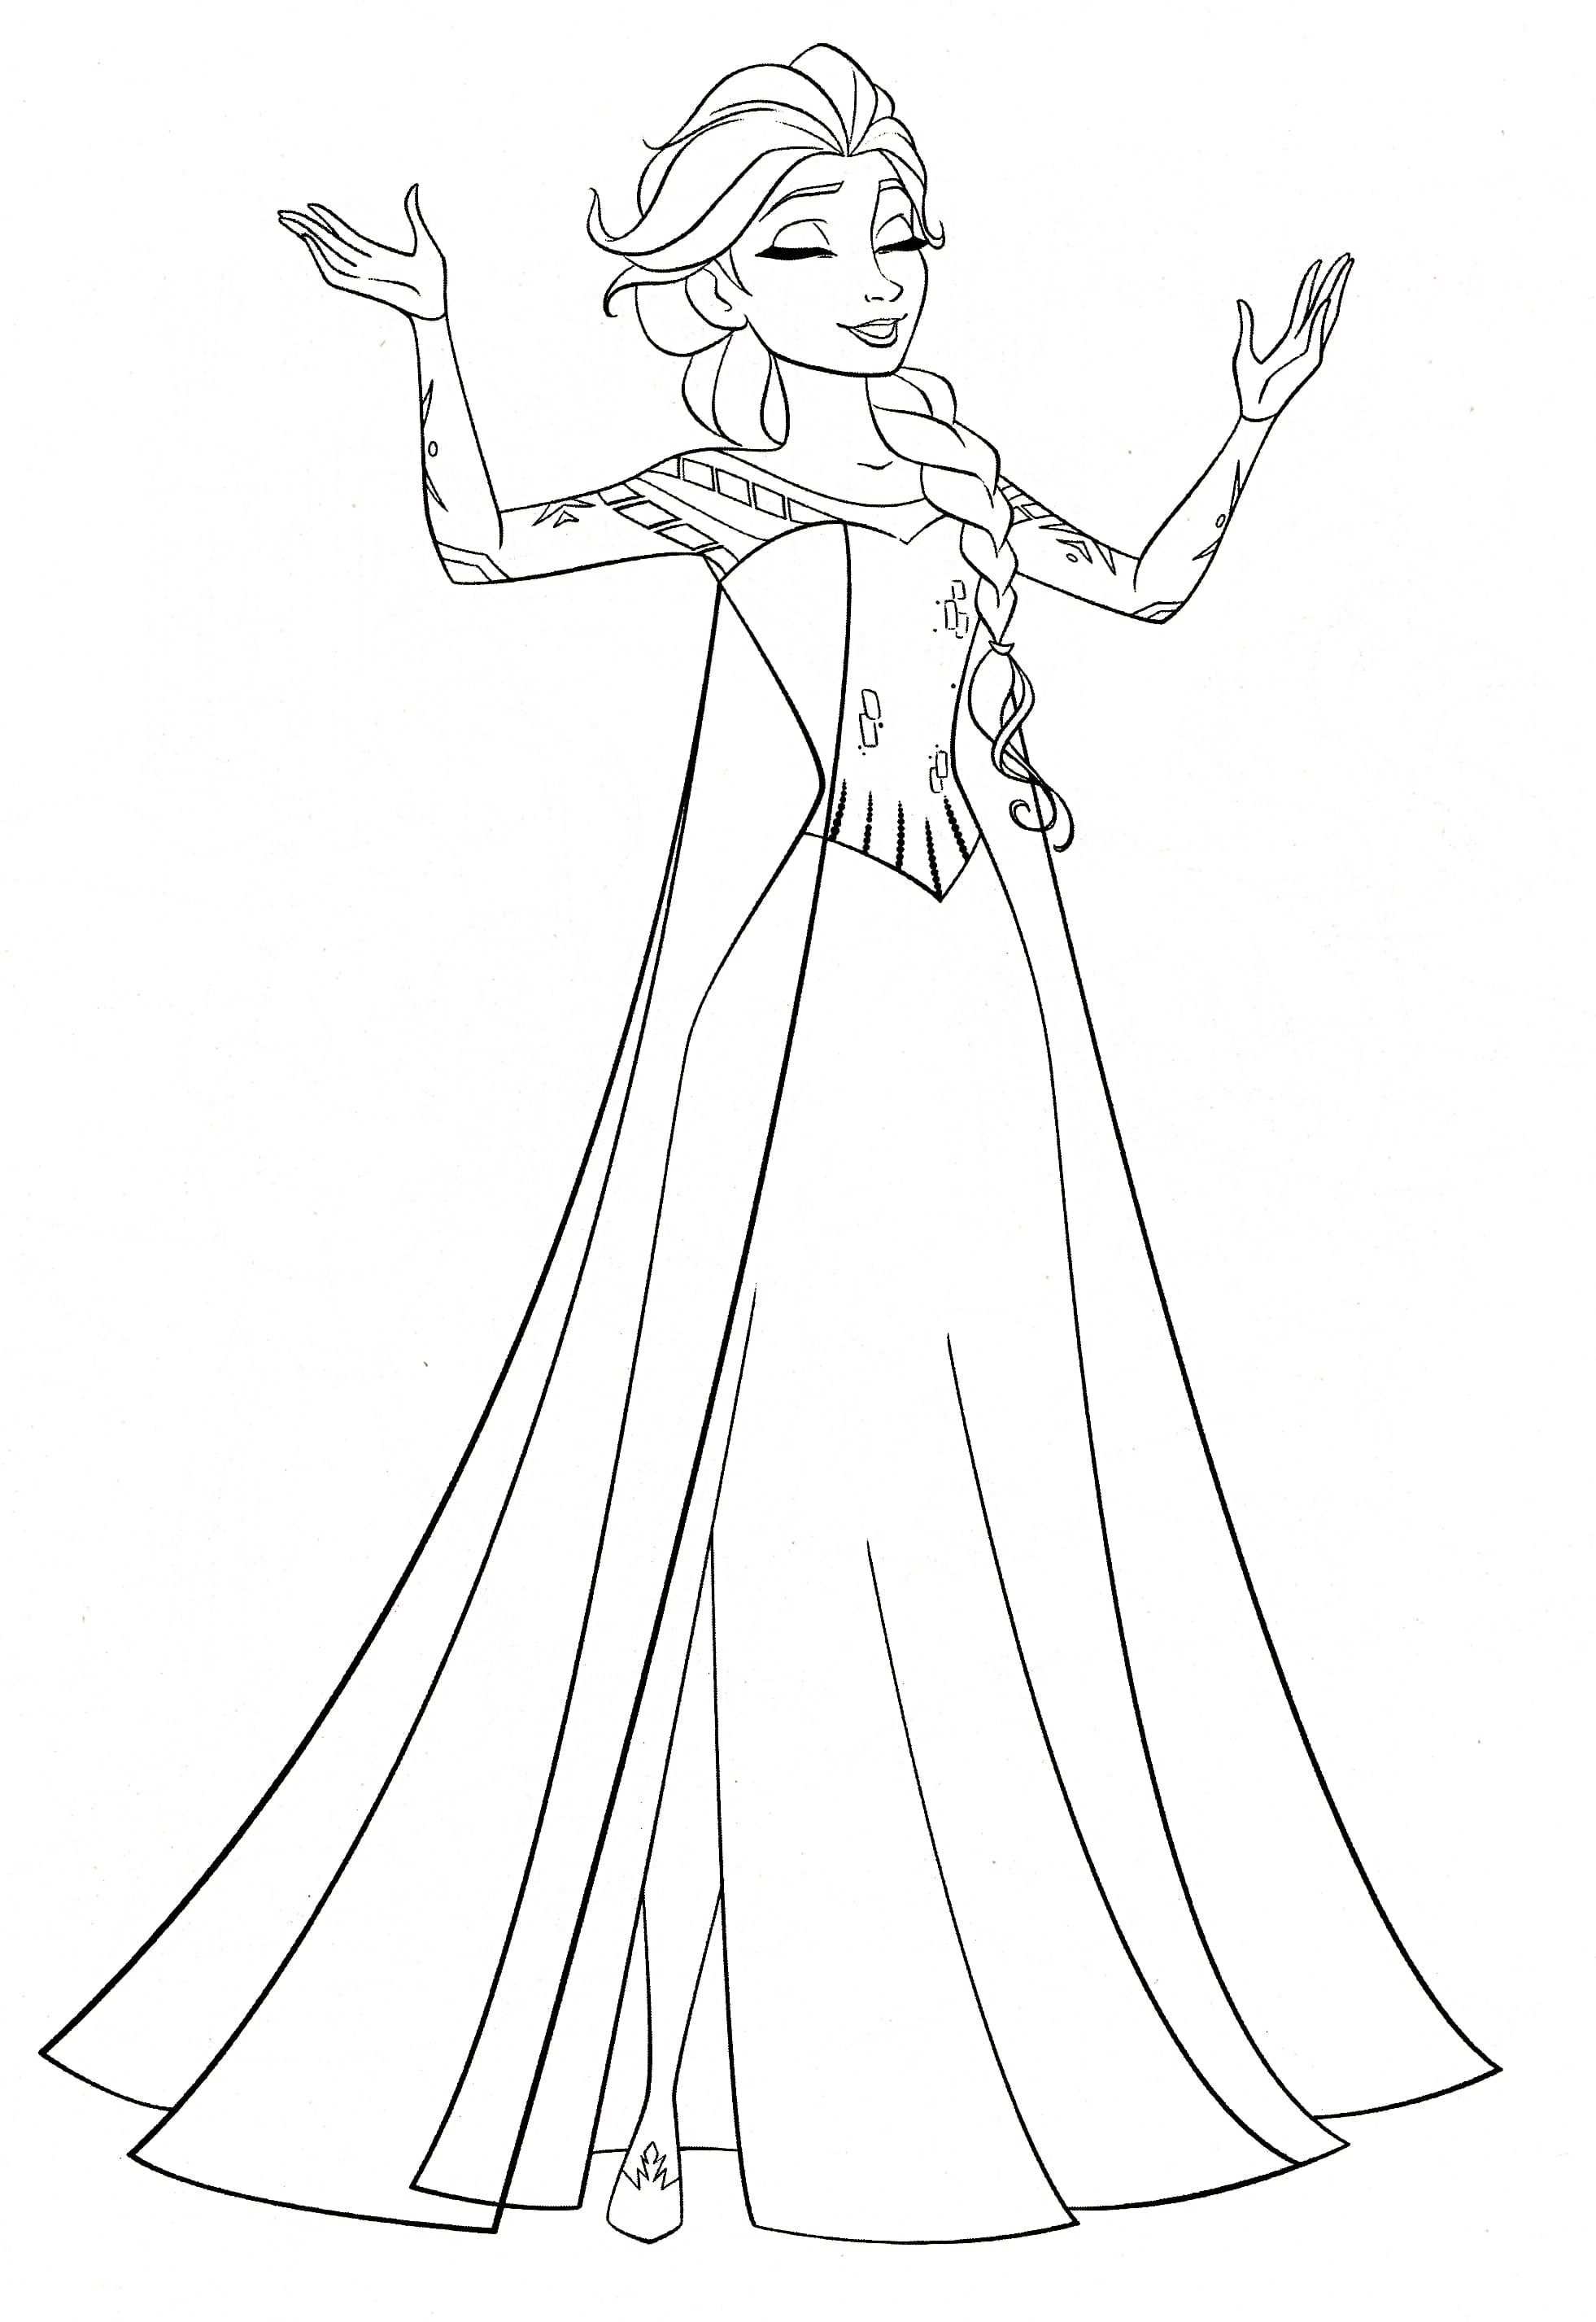 Free Elsa Coloring Pages In 2020 Elsa Coloring Pages